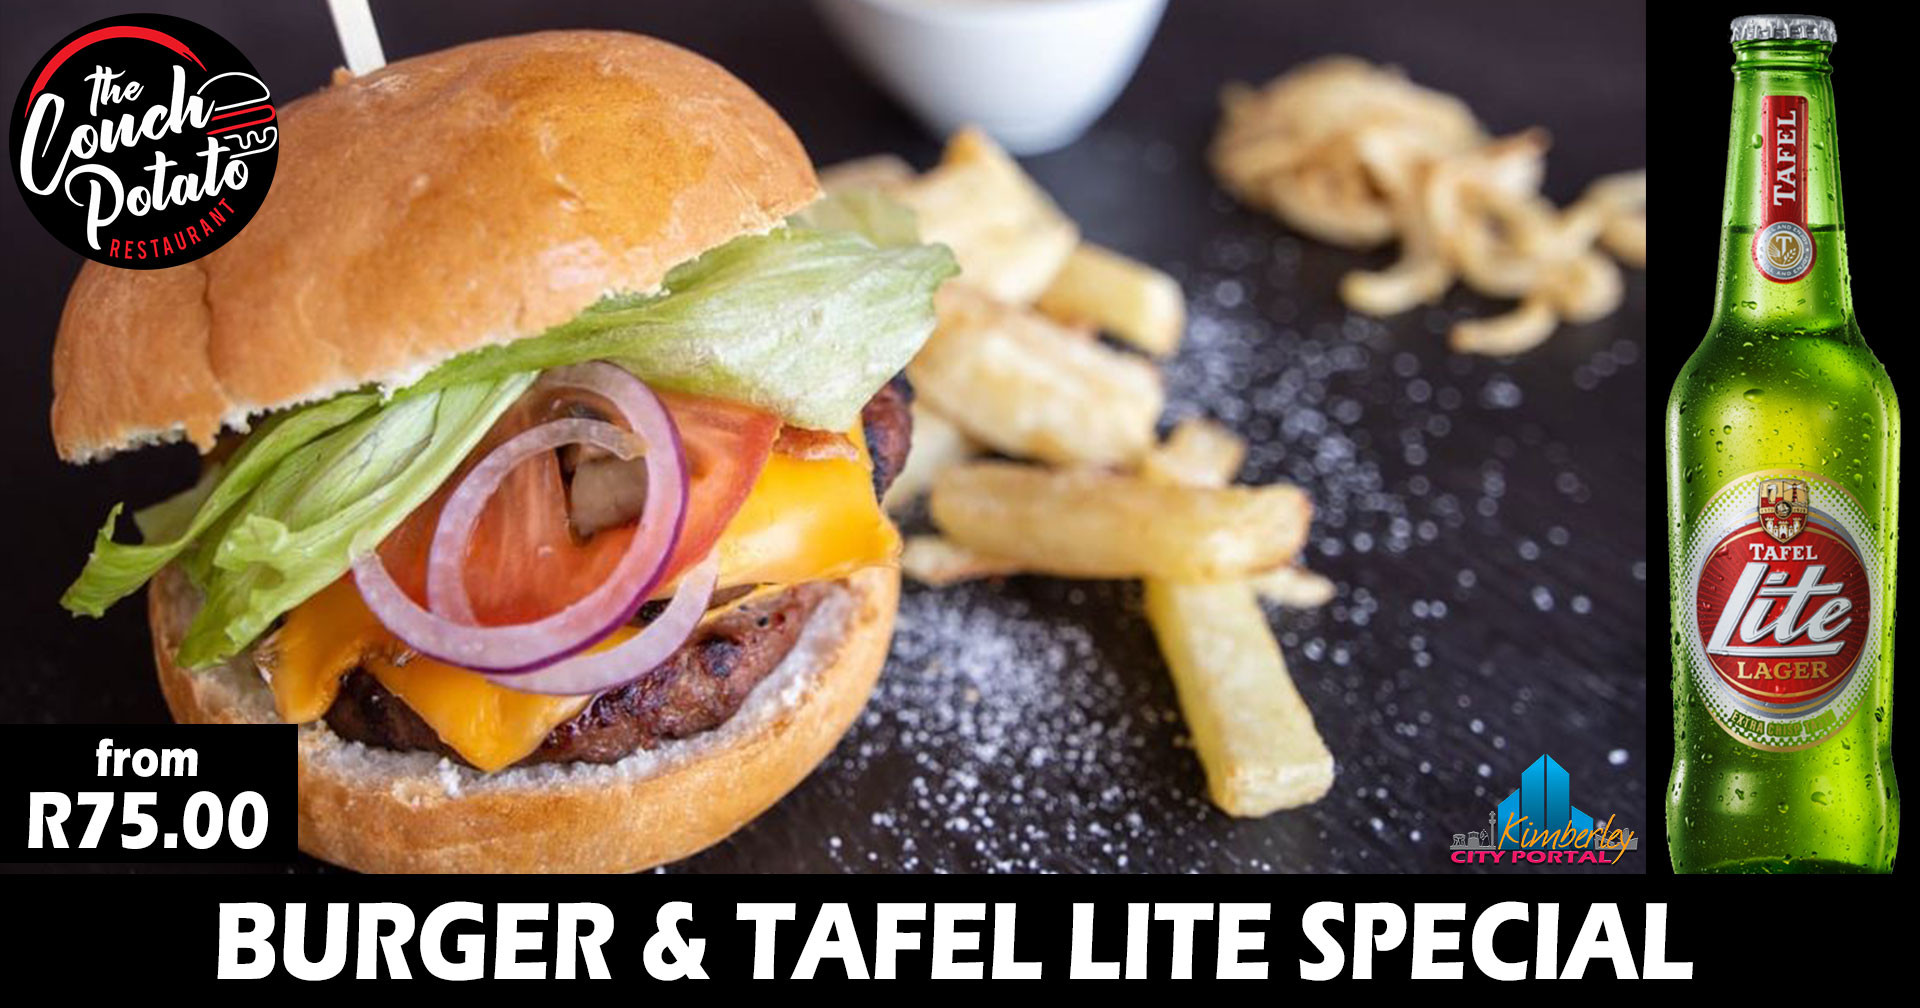 THE_COUCH_POTATO-Burger_and_Tafel_Lite_Special-KCP-SP-20211028-v1_00a